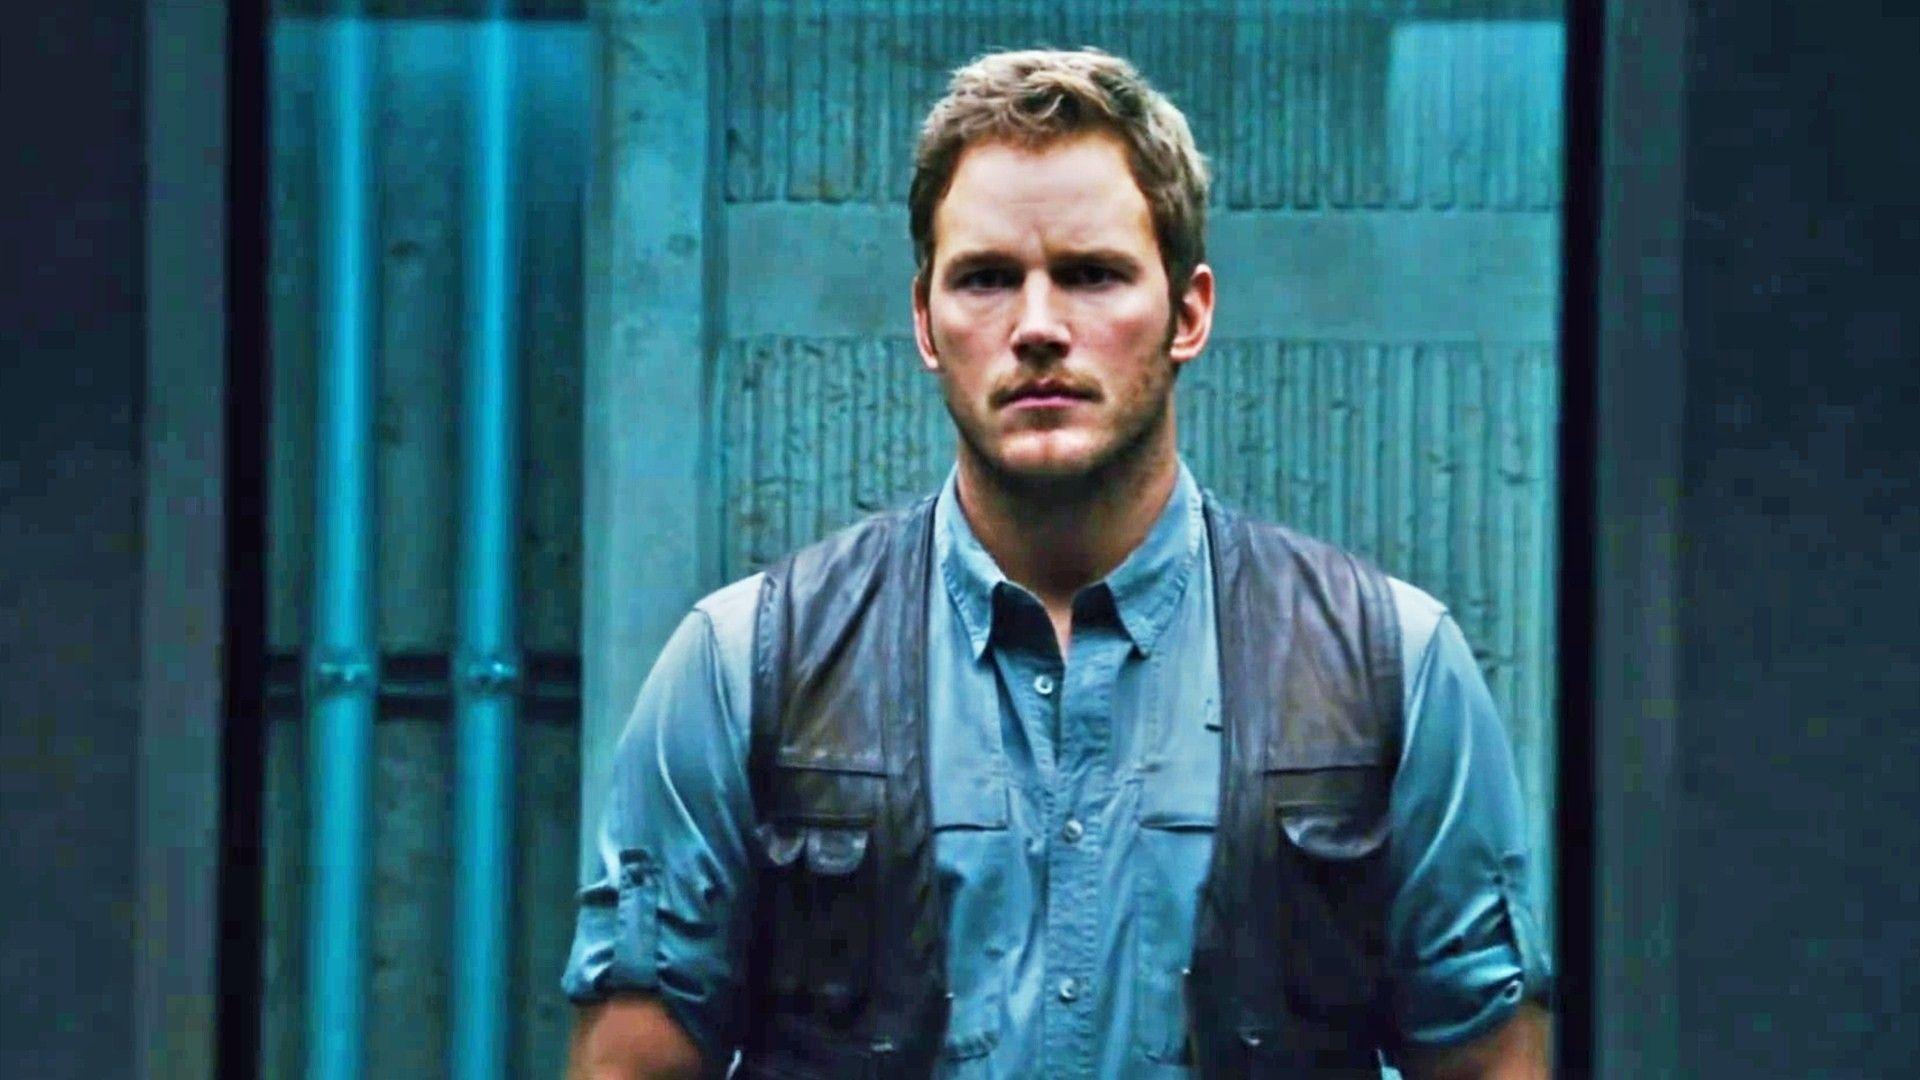 Chris Pratt Wallpapers High Resolution and Quality Download